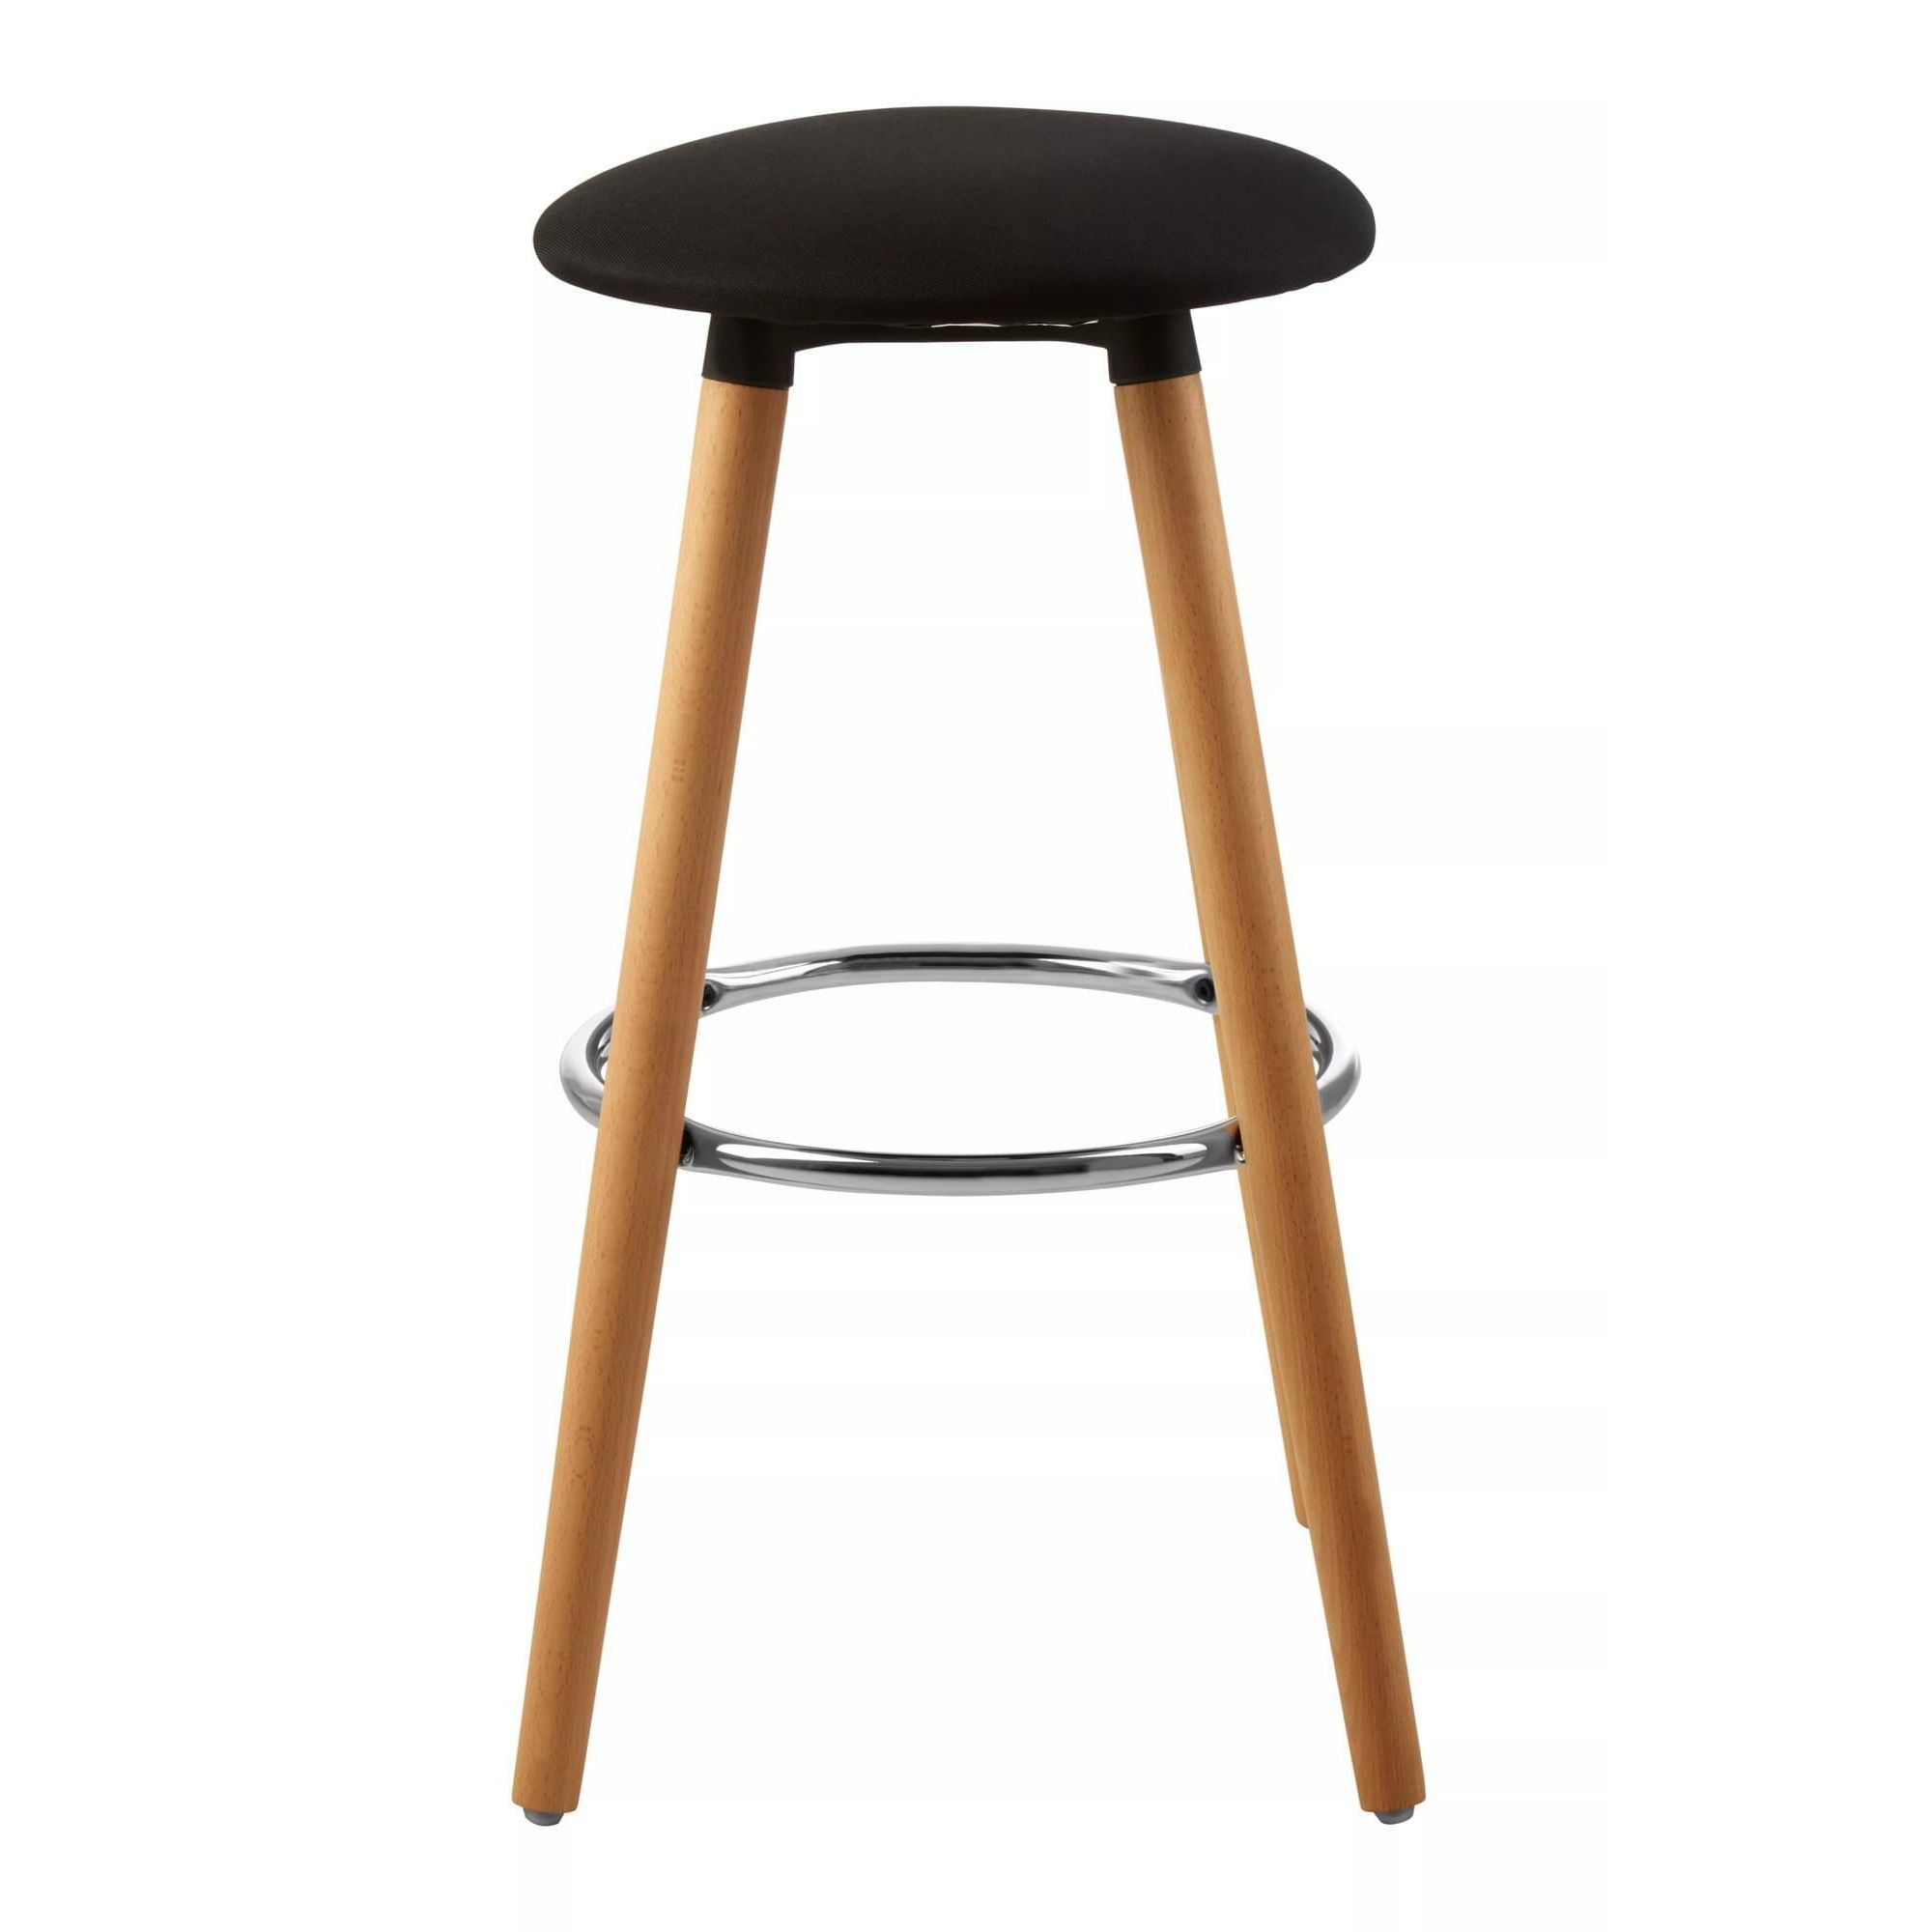 Interiors by Premier Black Round Bar Stool, Easy to Clean Kitchen Bar Stool, Footrest Barseat, Space-Saver Breakfast Stool - image 1